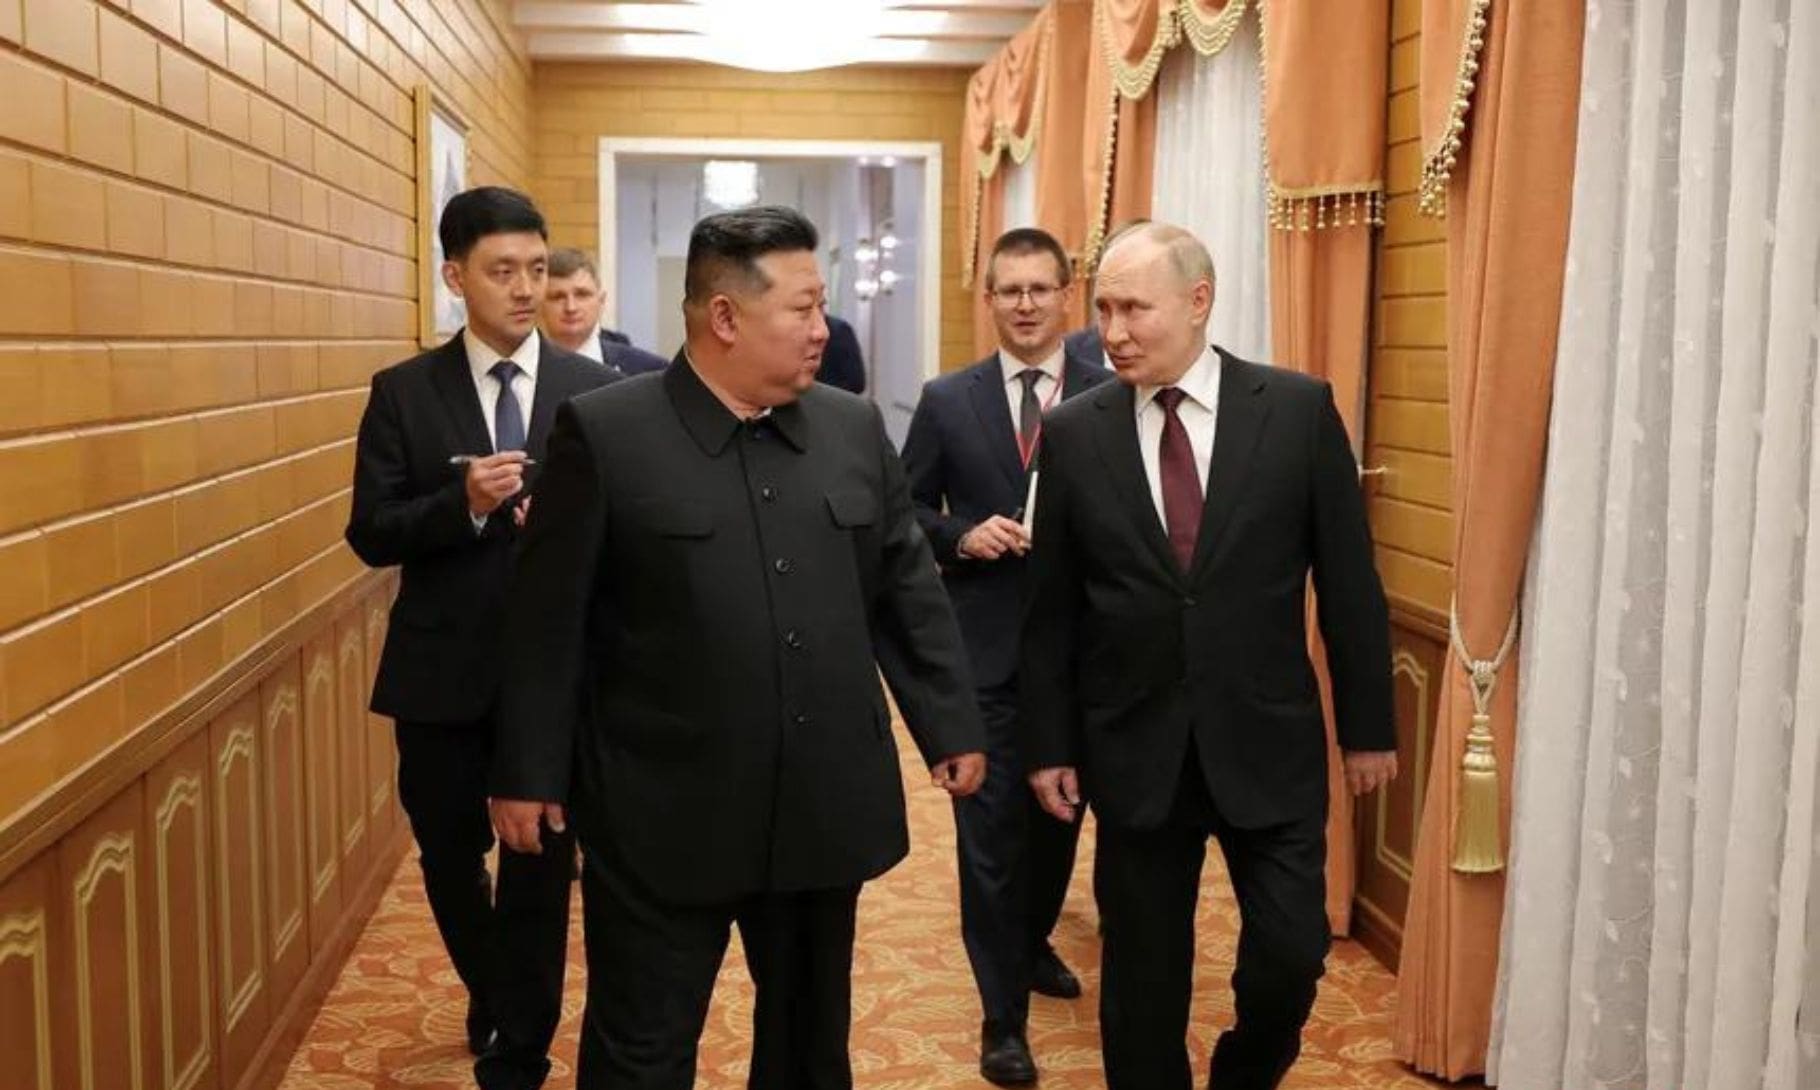 Putin’s Historic Visit To North Korea: Is It A Threat To Global Security?